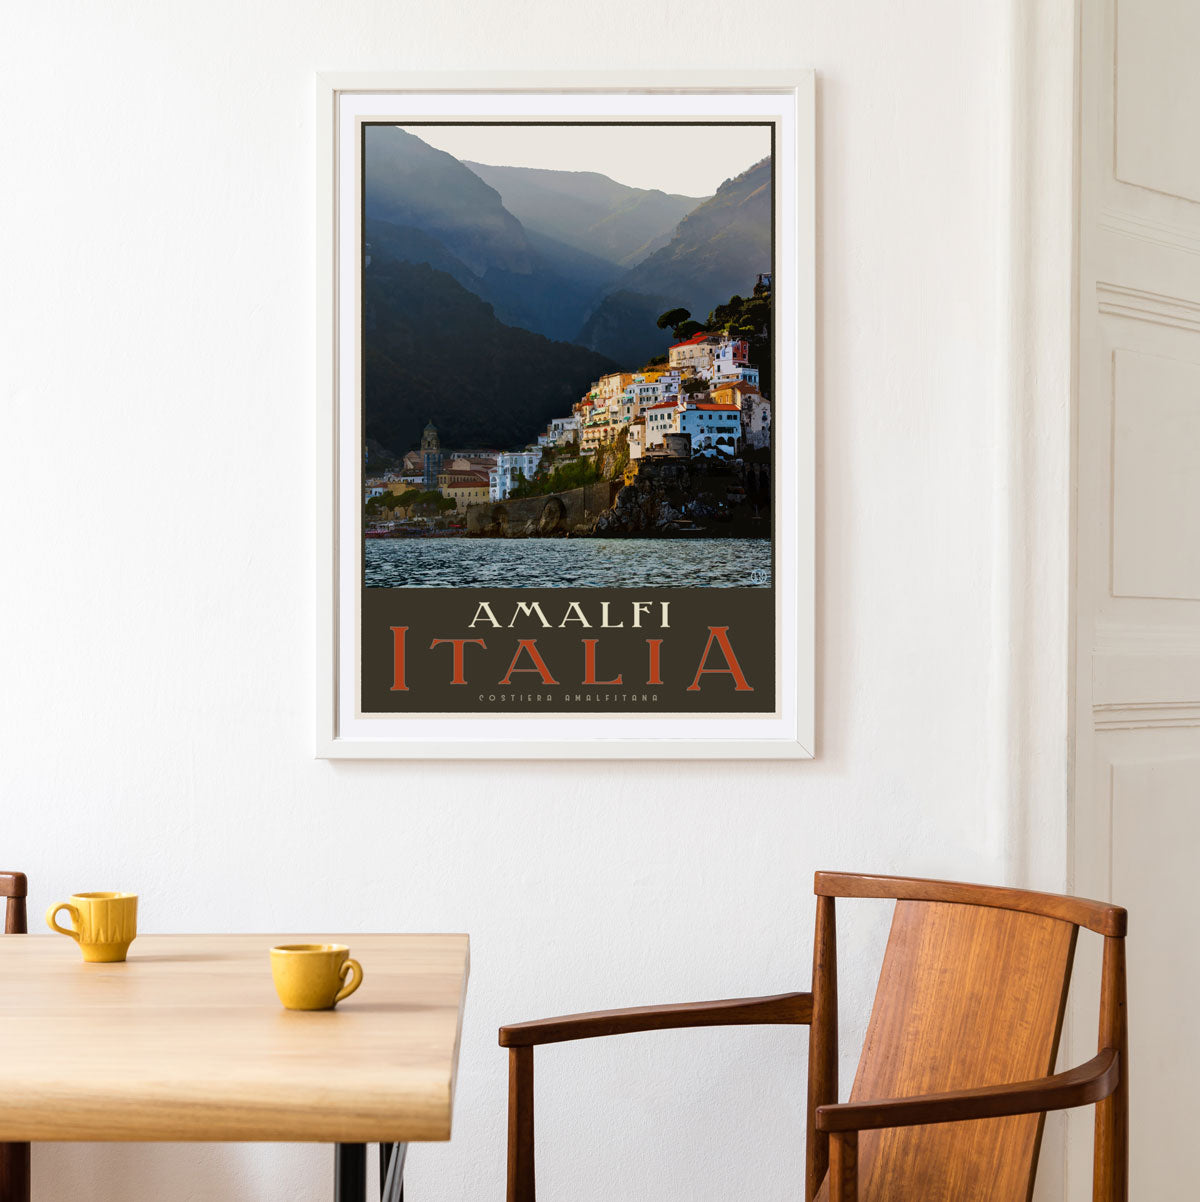 Amalfi Italy retro vintage travel style framed poster by Places We Luv 